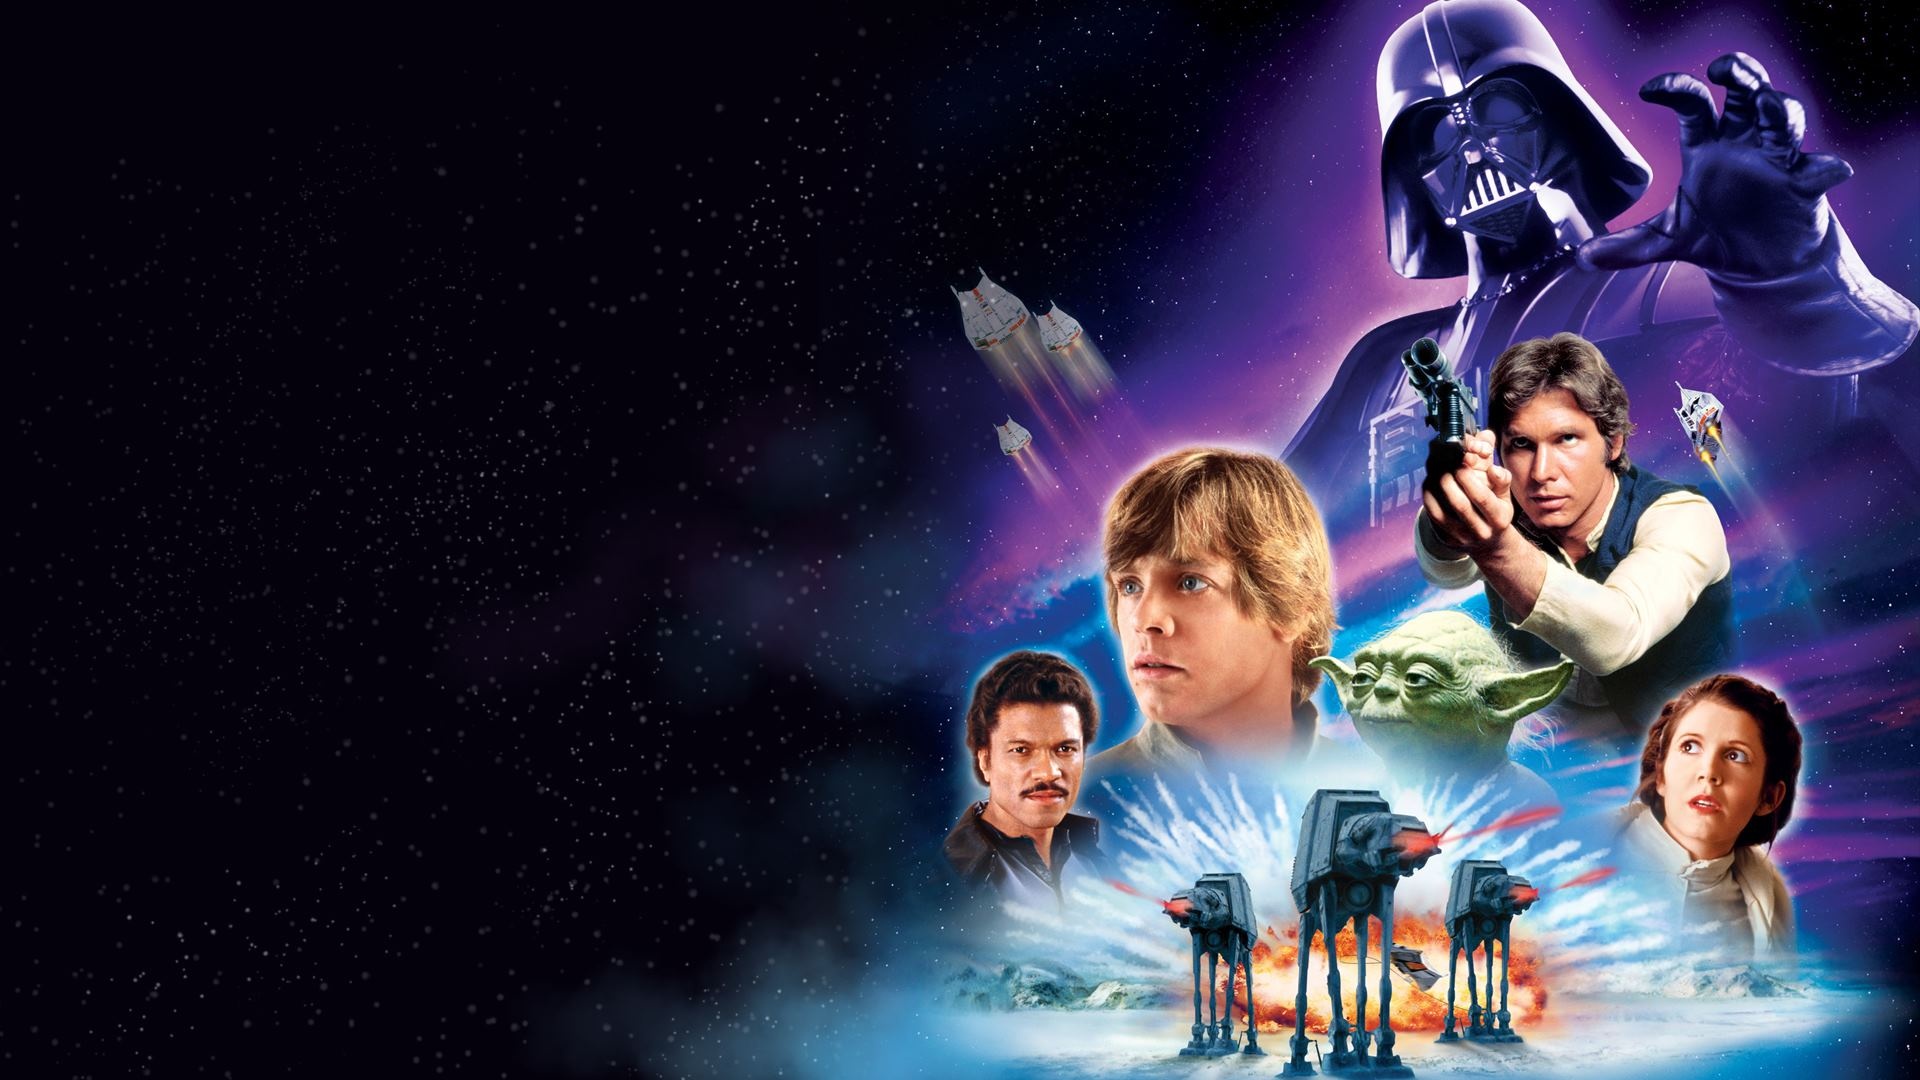 HD Star Wars Episode V Wallpaper - New Post has been published